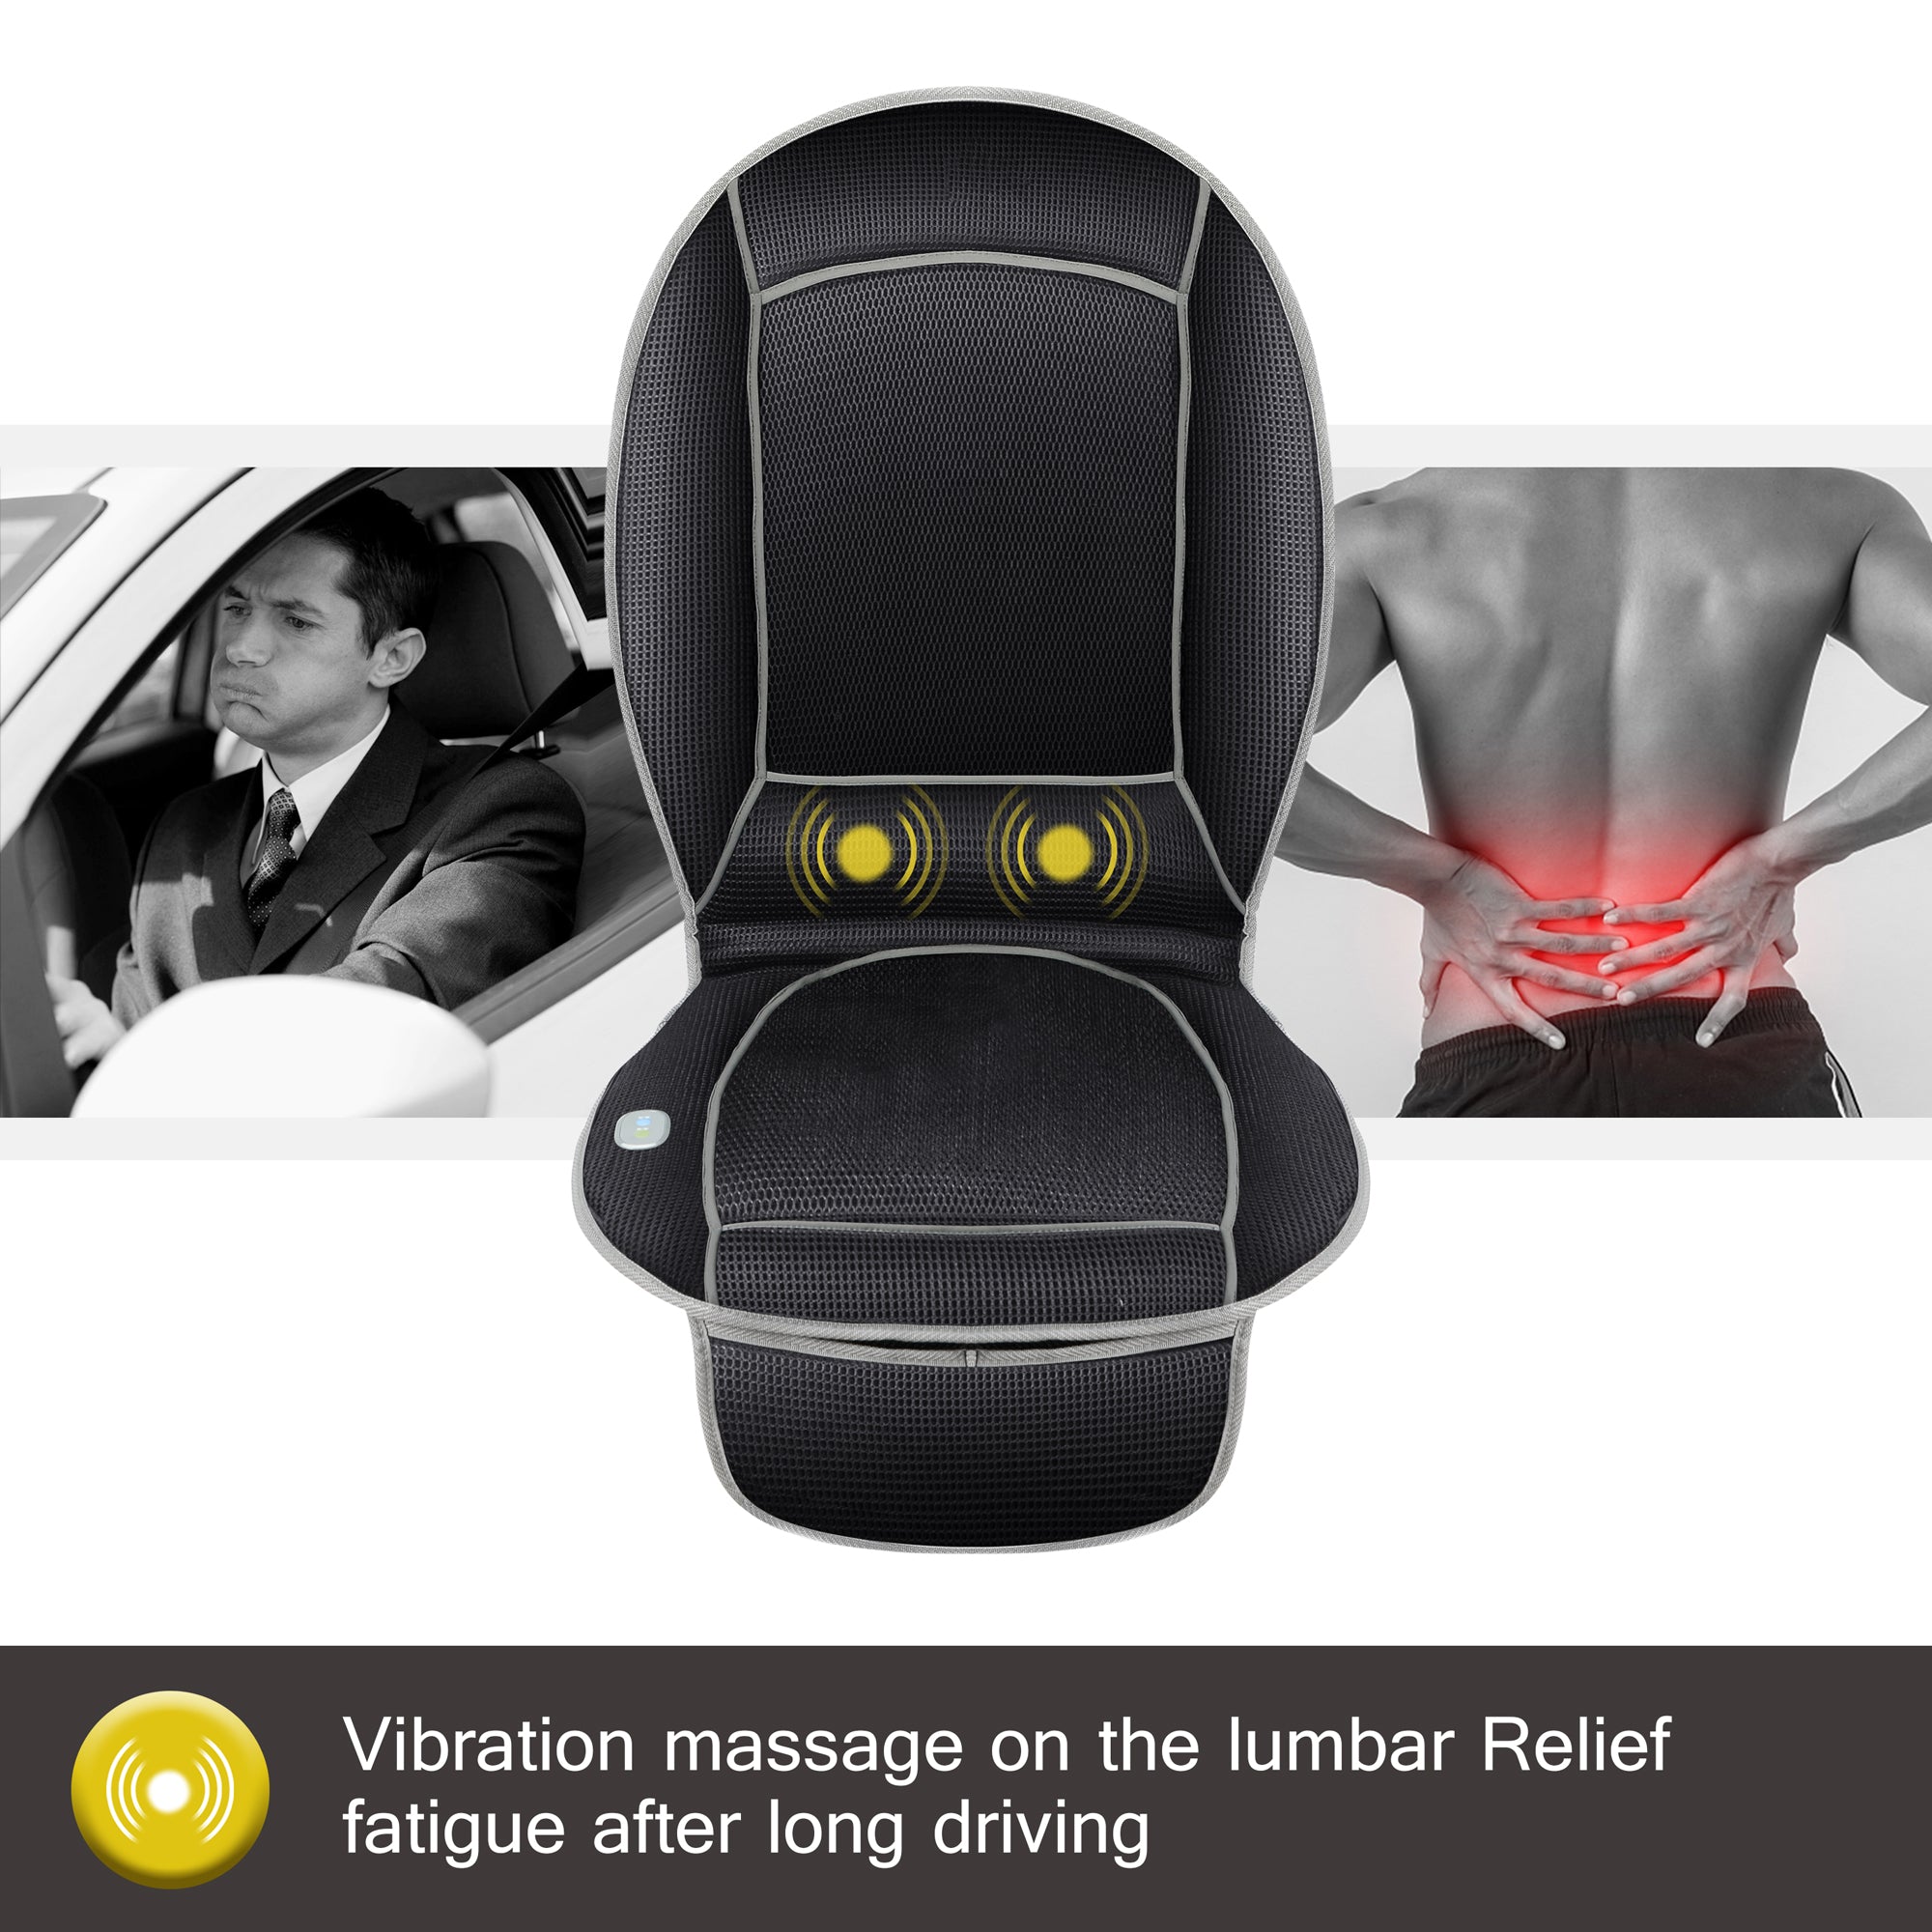 AirFlow Seat Cushion – Reliable Mobility